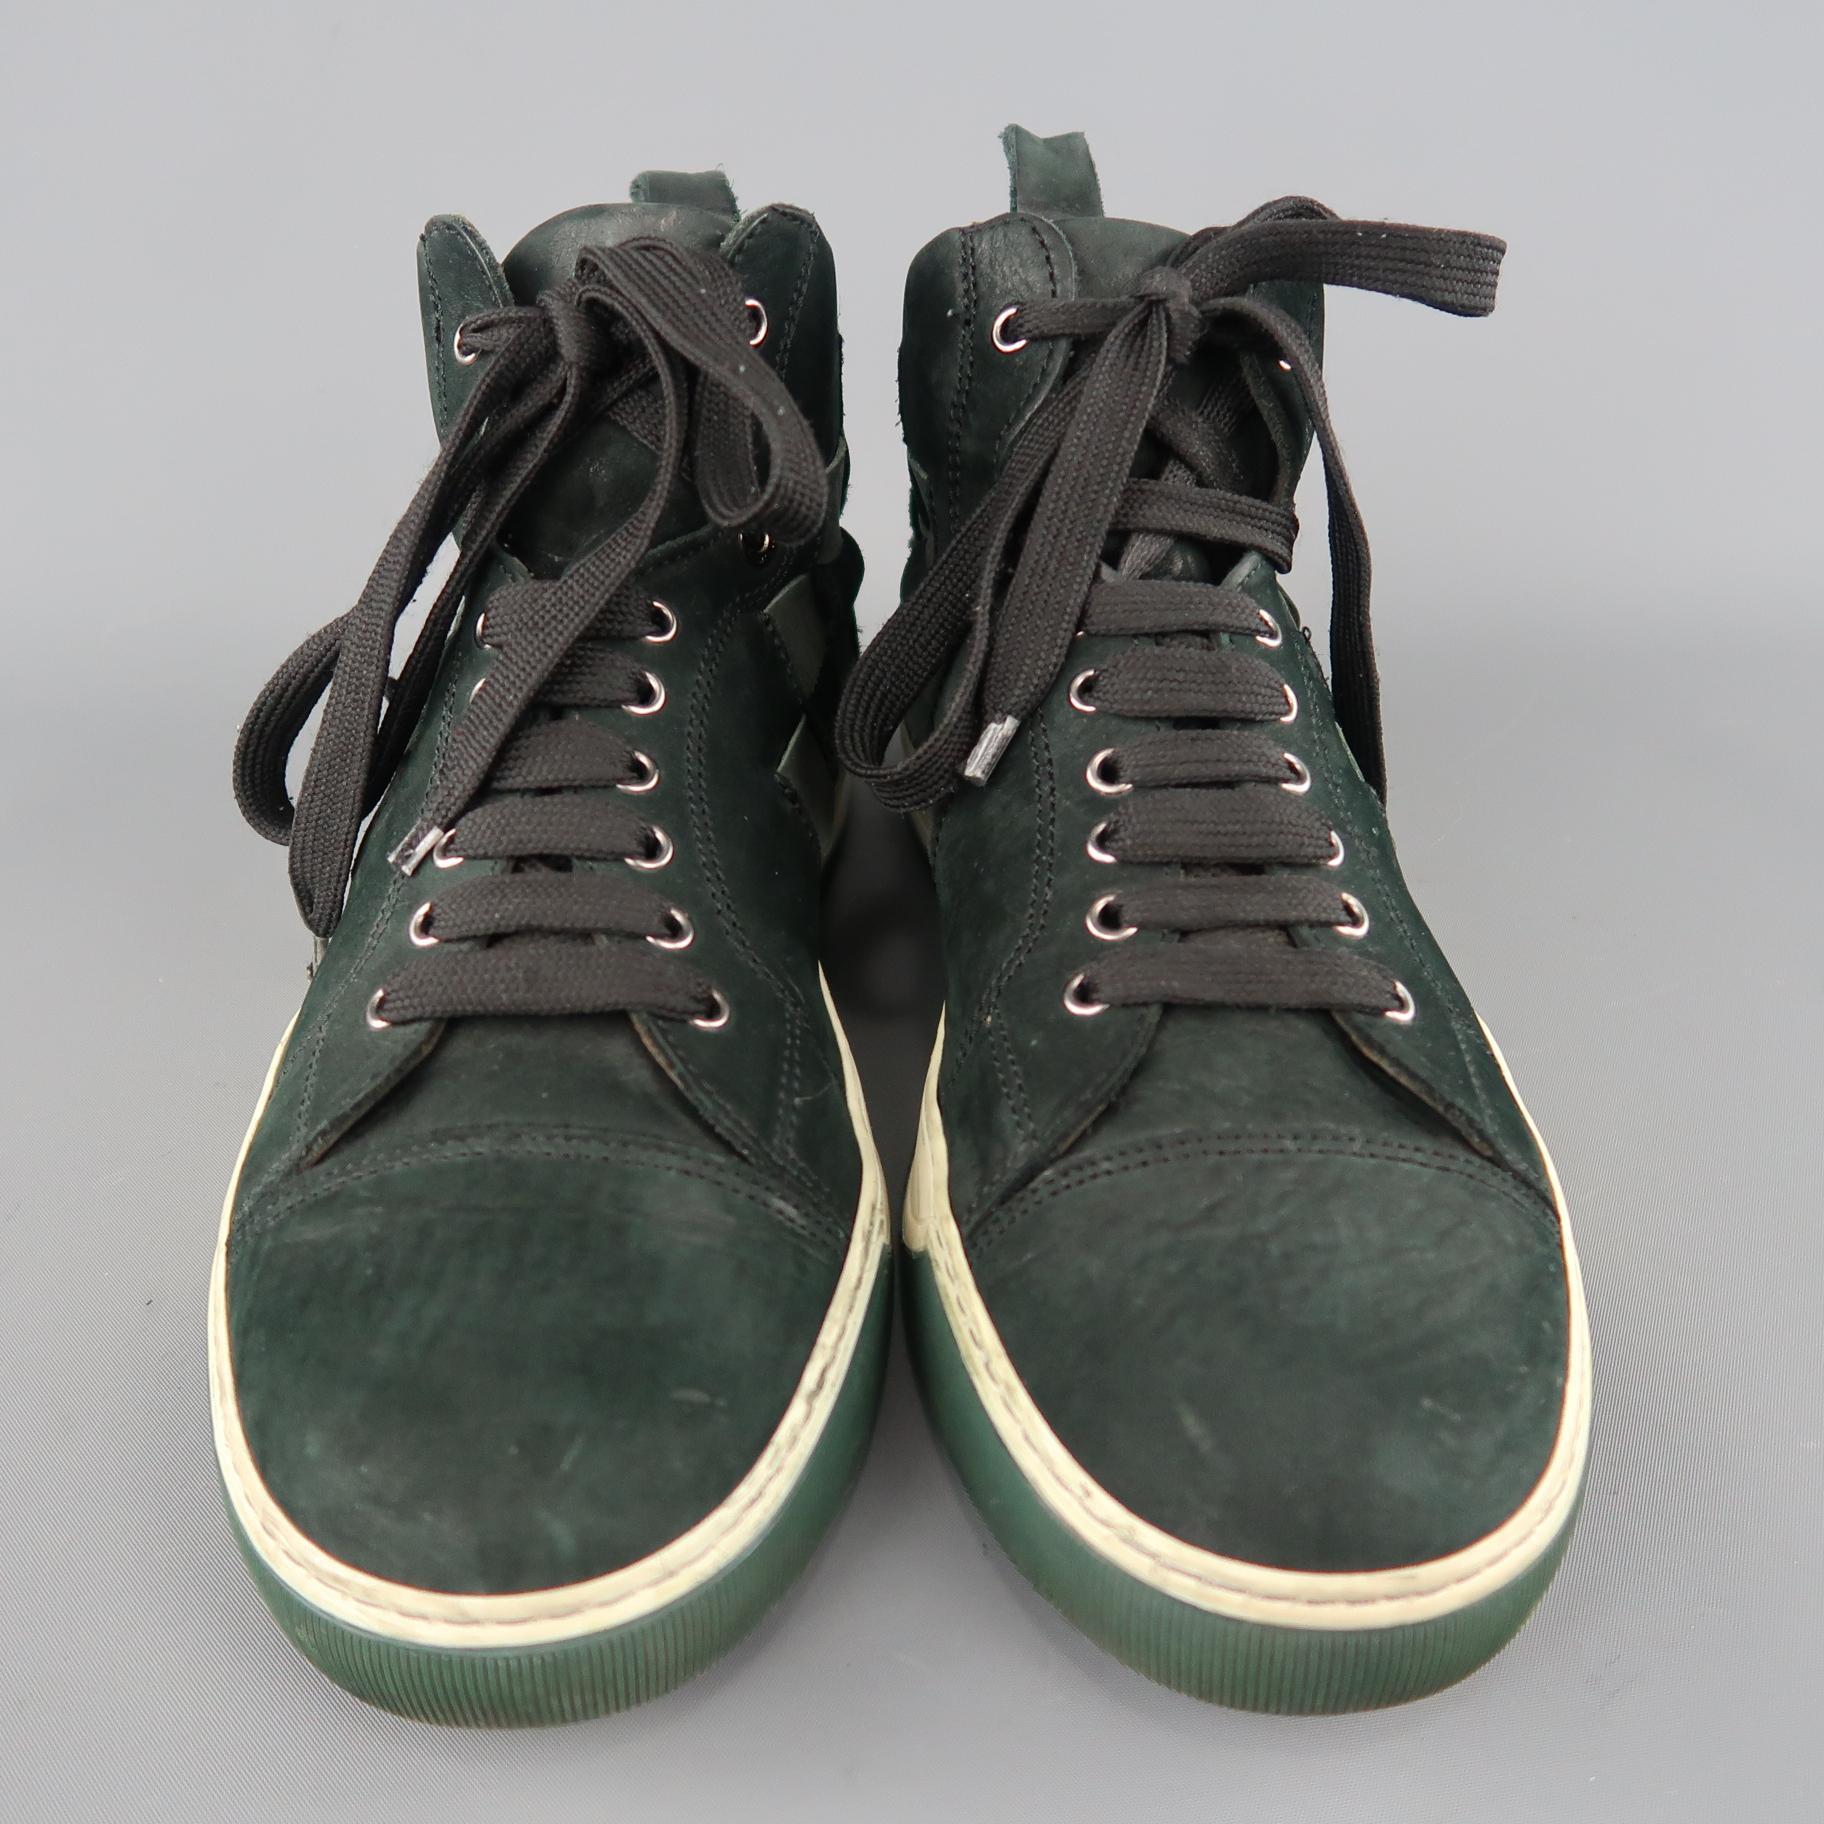 LANVIN high top sneakers come in forest green nubuck leather with a cap toe, dual tone rubber sole, and woven detail. Wear throughout. As-is. With Box. Made in Portugal.
 
Good Pre-Owned Condition.
Marked: UK 8
 
Outsole: 12 x 4.25 in.
